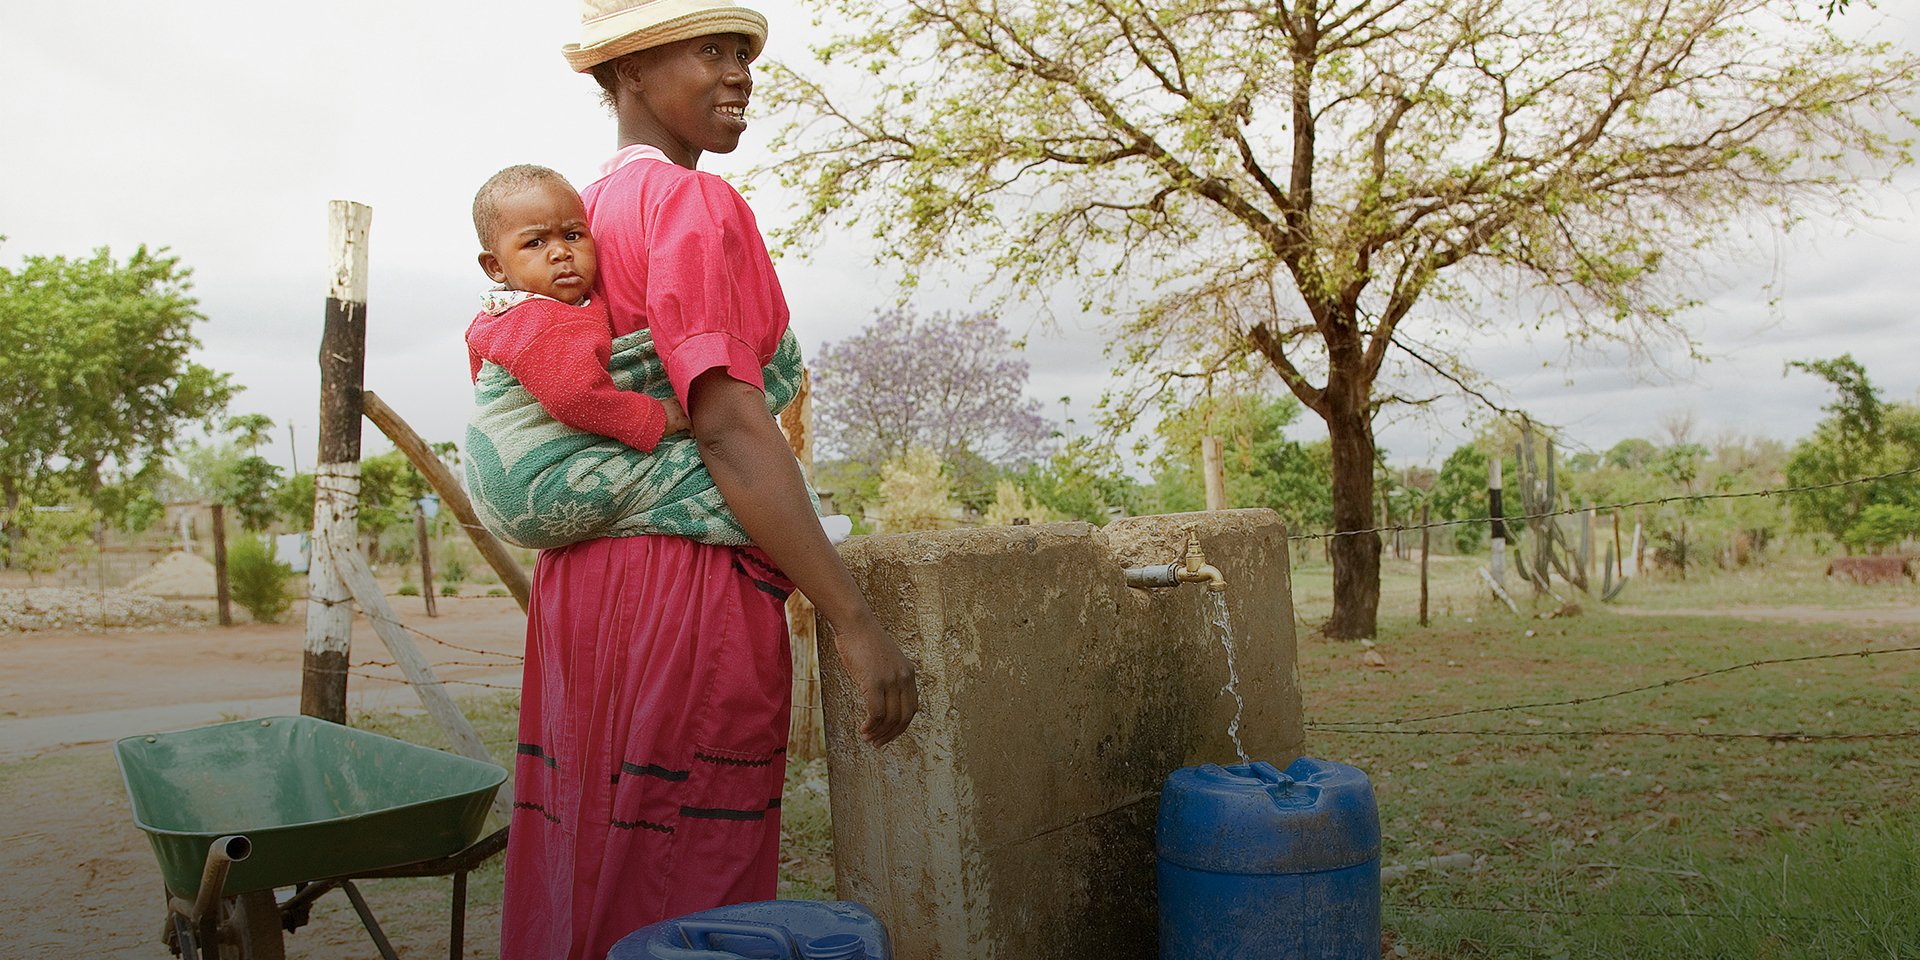 A woman and her child fill barrels with water in South Africa.